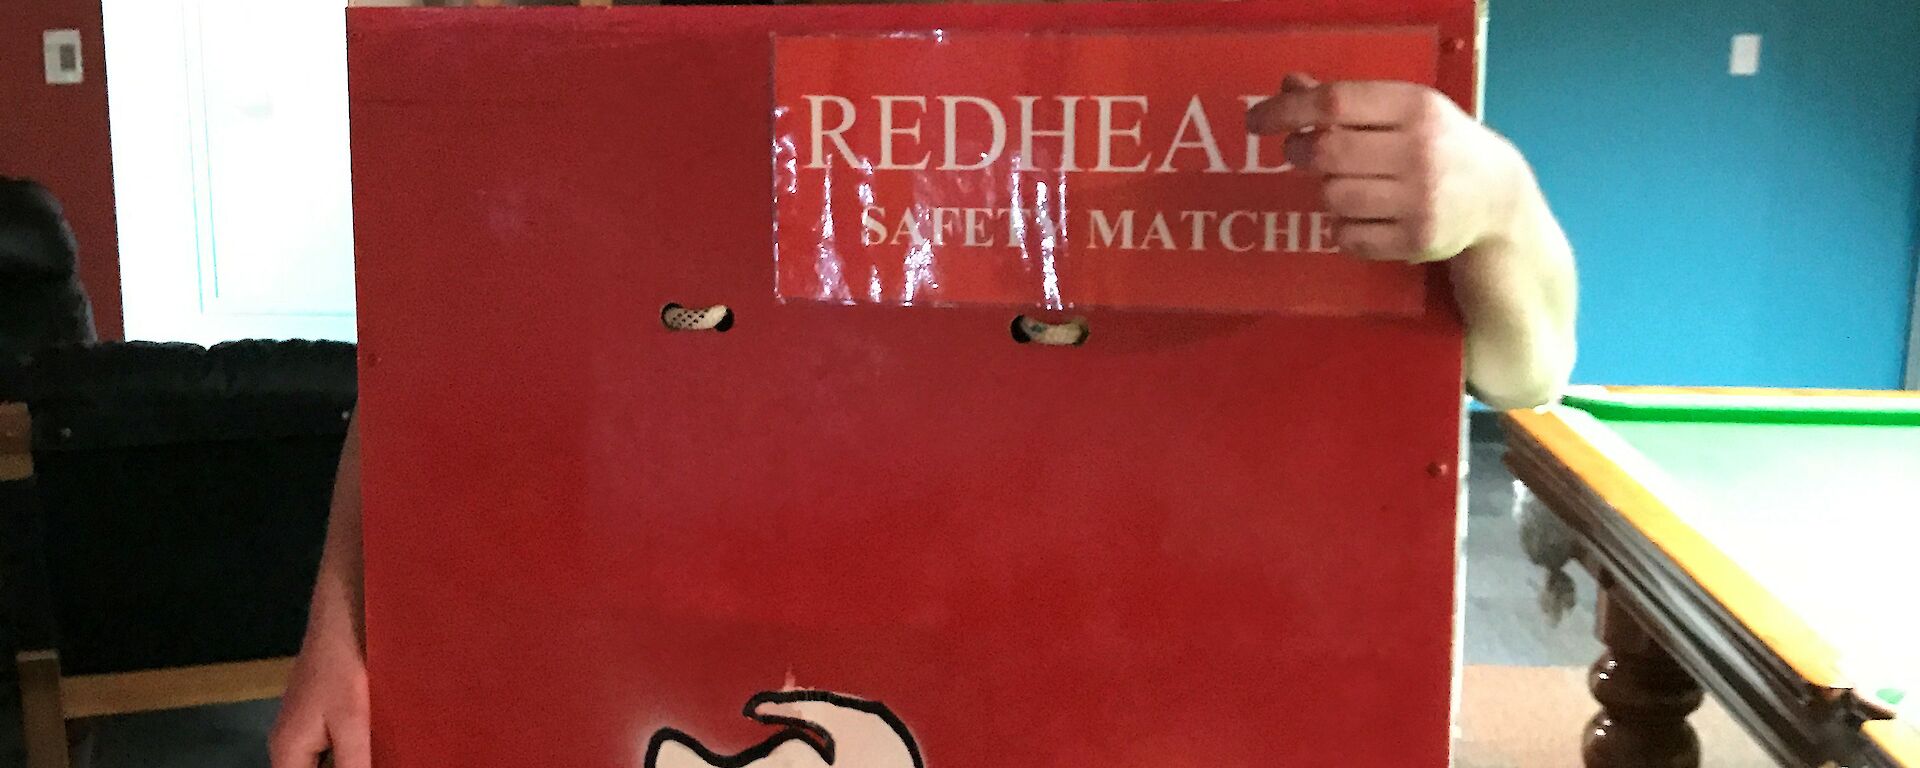 Man in box painted as redheads matches box, his face is painted red to look like the top of a match and there are large wooded matches hanging in the box beside him